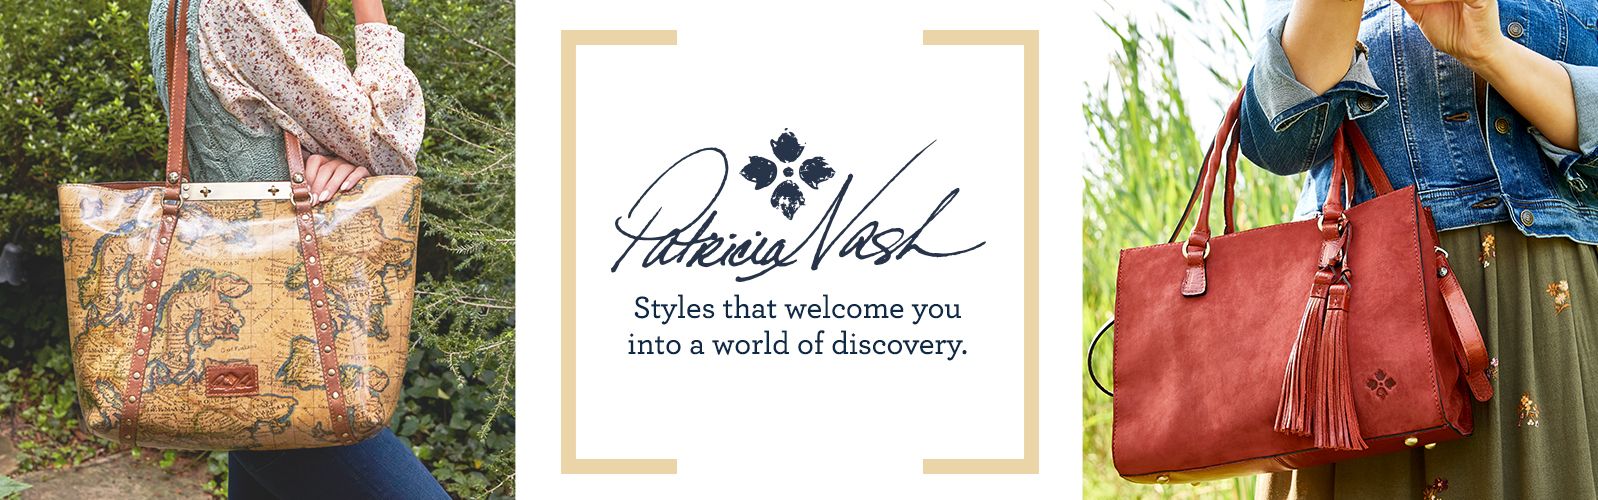 Patricia Nash — Styles that welcome you into a world of discovery 